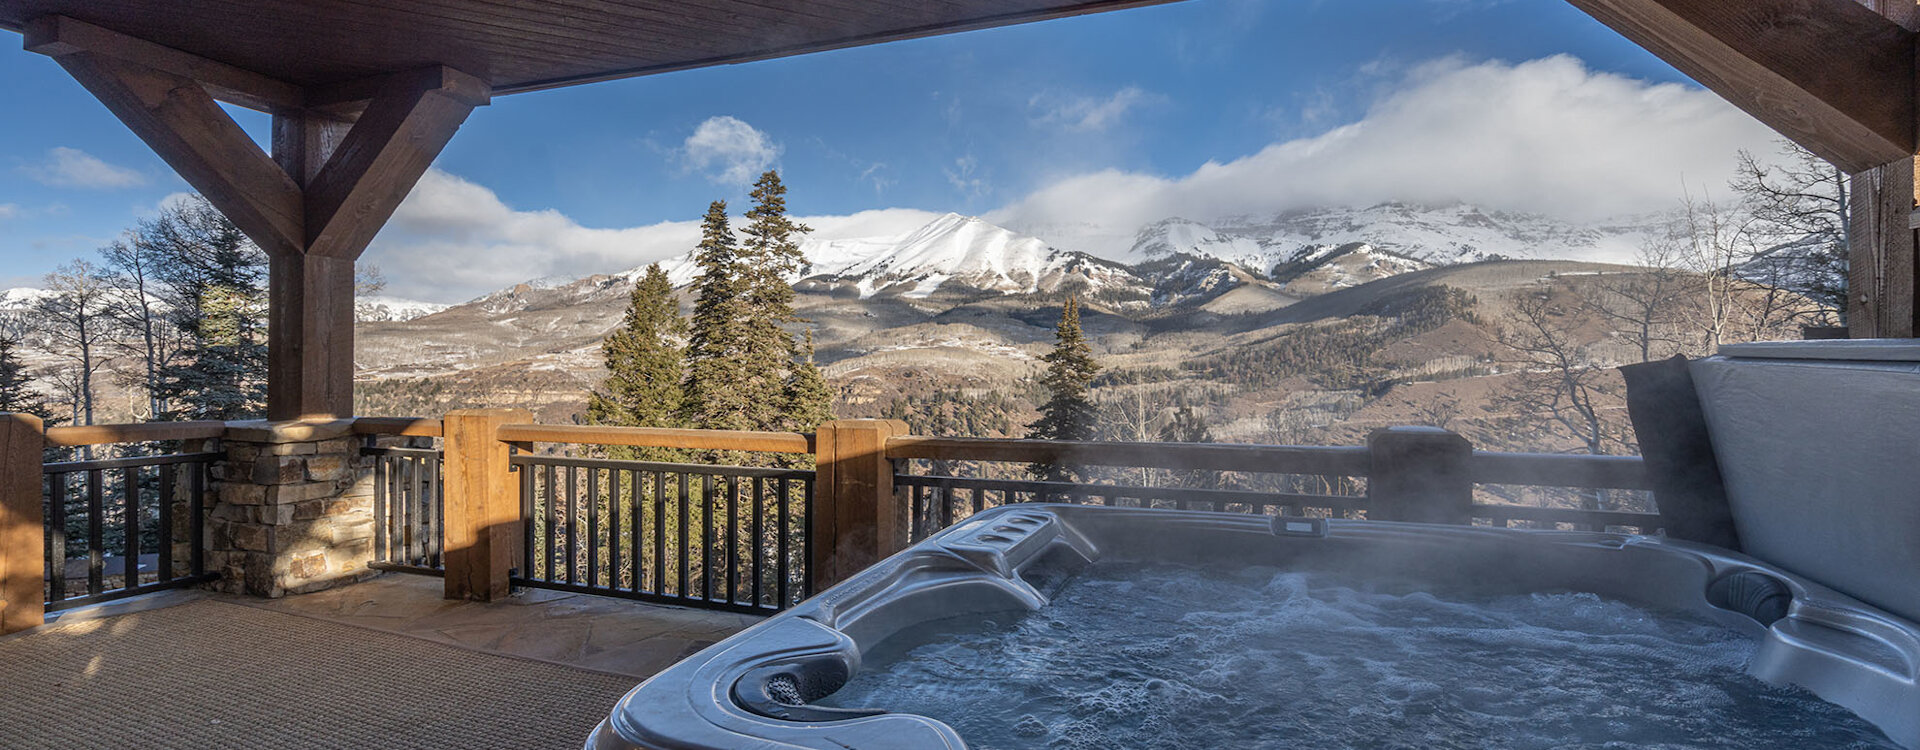 2.2-see-forever-121-mountain-village-hot-tub2